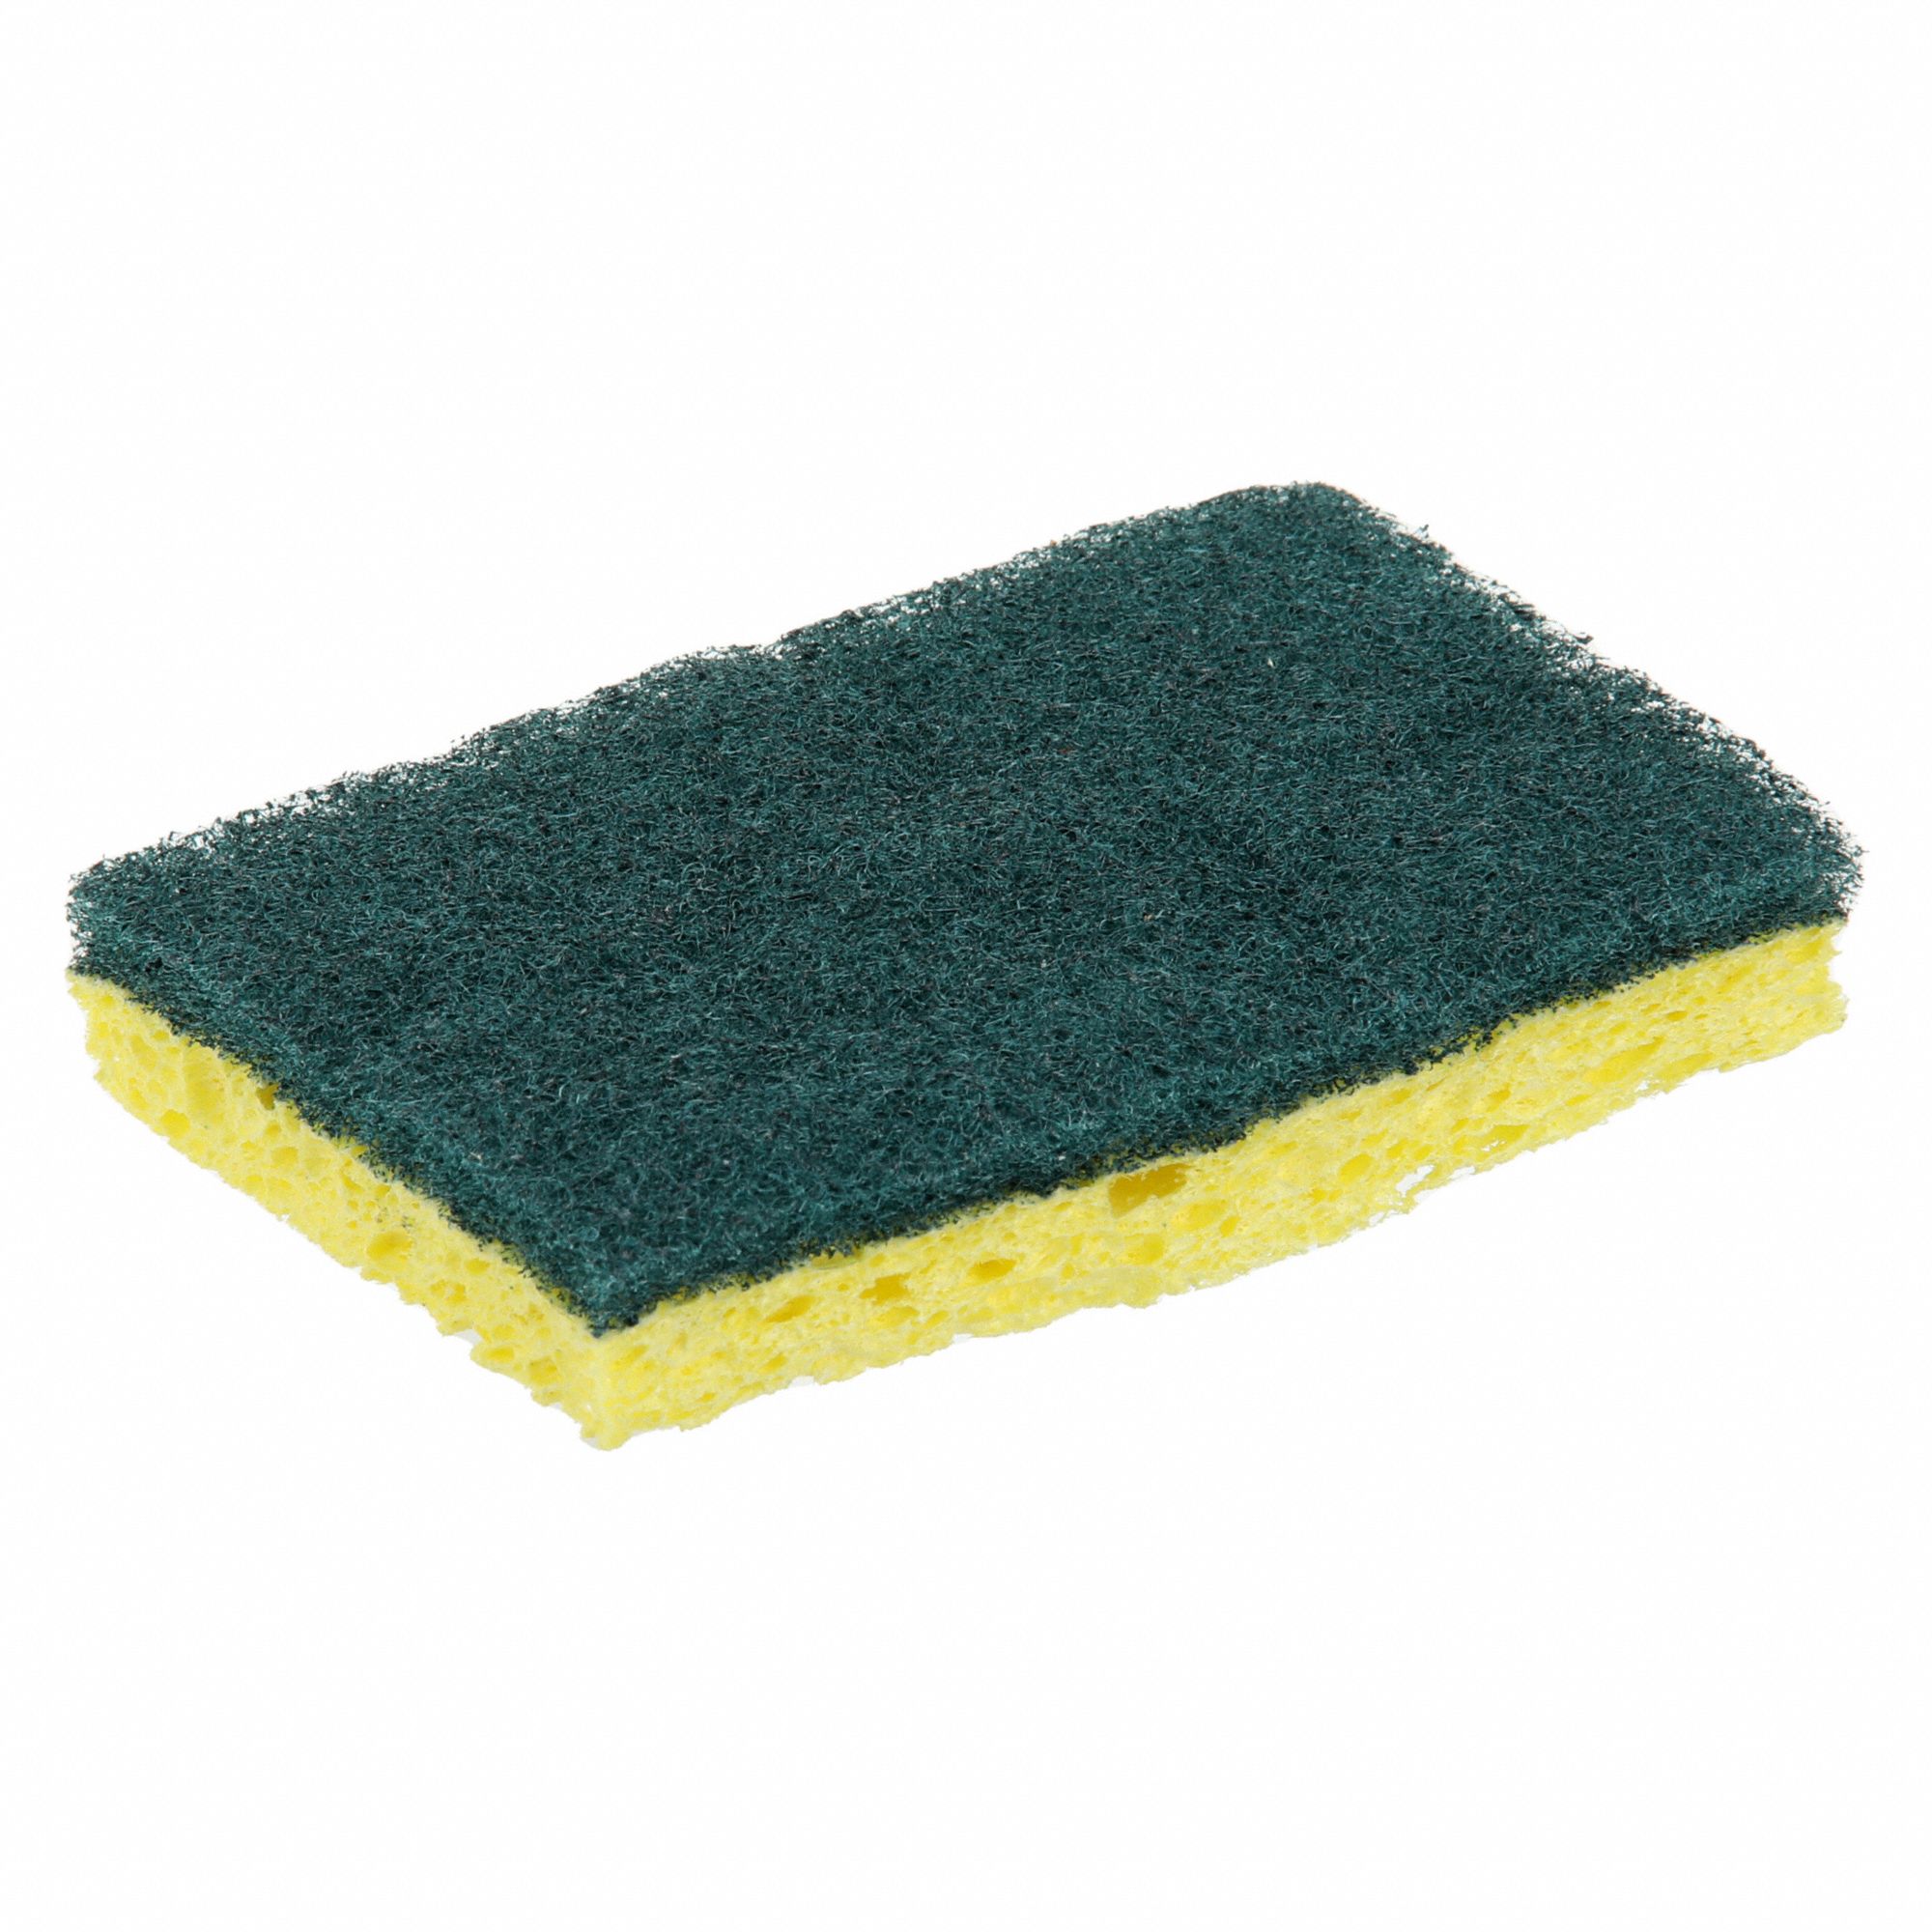 Copper Scrubbers for Cleaning Dishes, Kitchen Scrub Sponge Pads